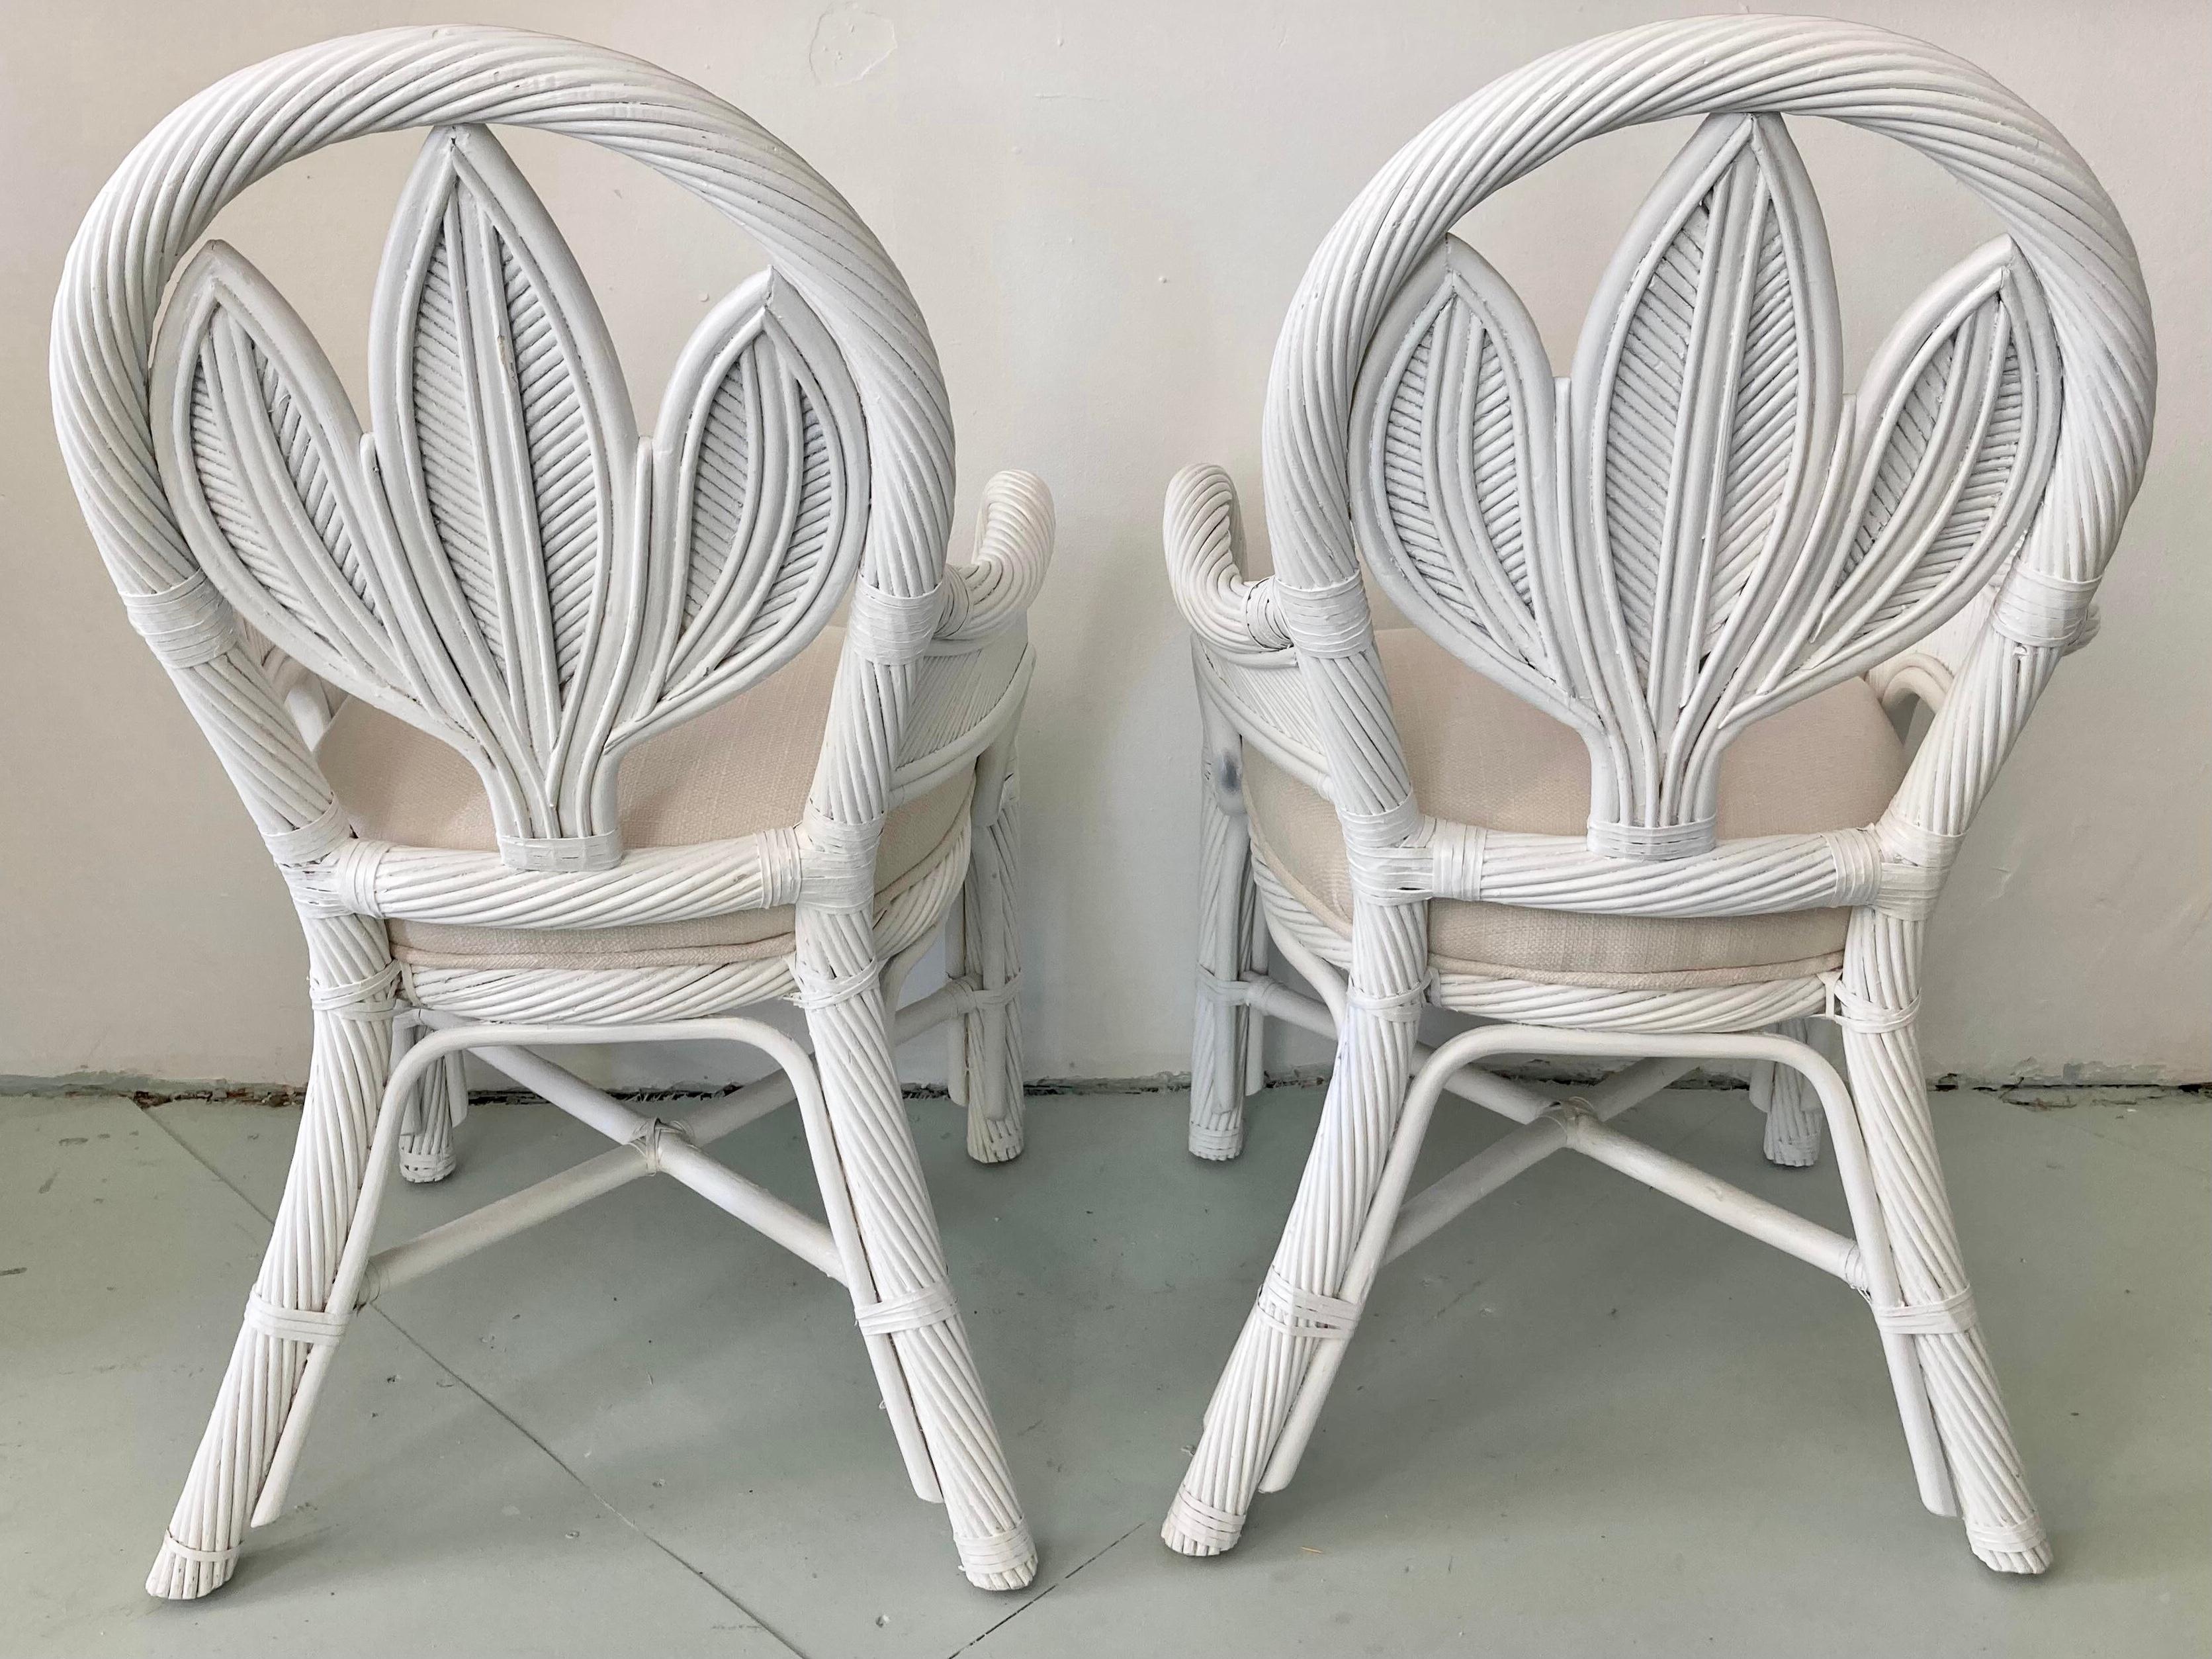 Gabriella Crespi Pencil Reed Rattan Arm Chairs, a Pair In Good Condition For Sale In Los Angeles, CA